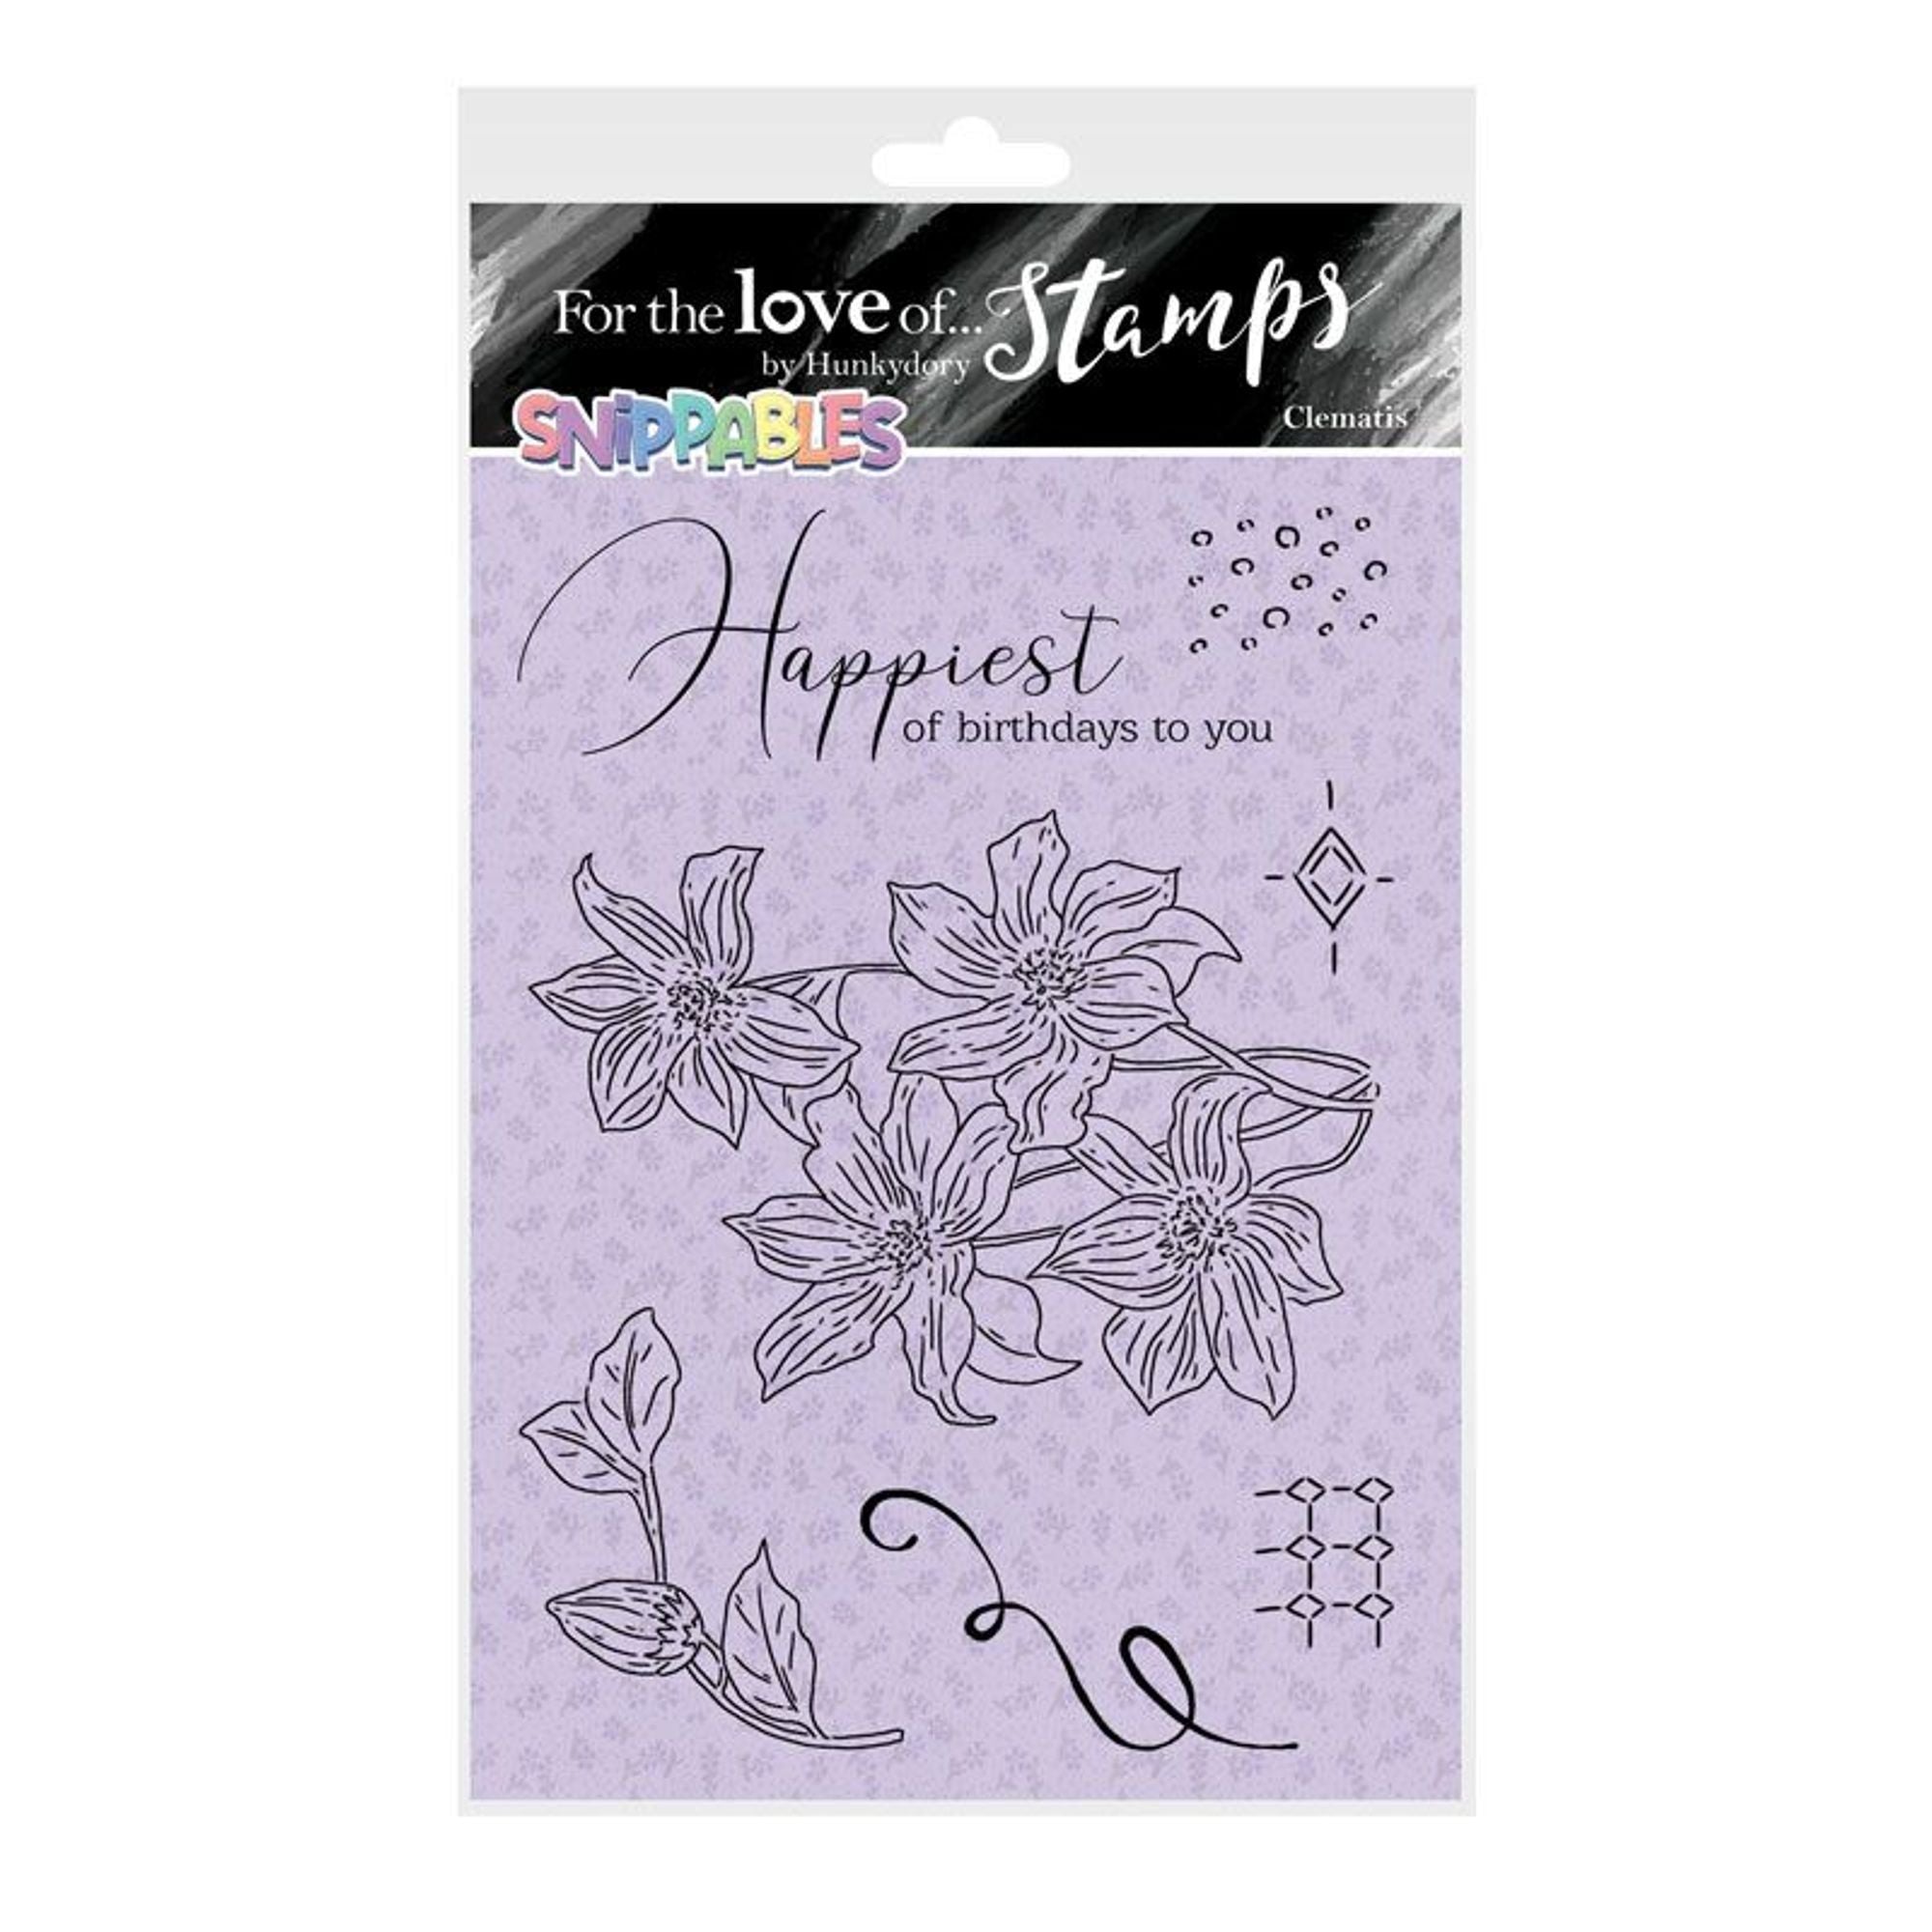 For the Love of Stamps - Floral Favourites Snippables - Clematis